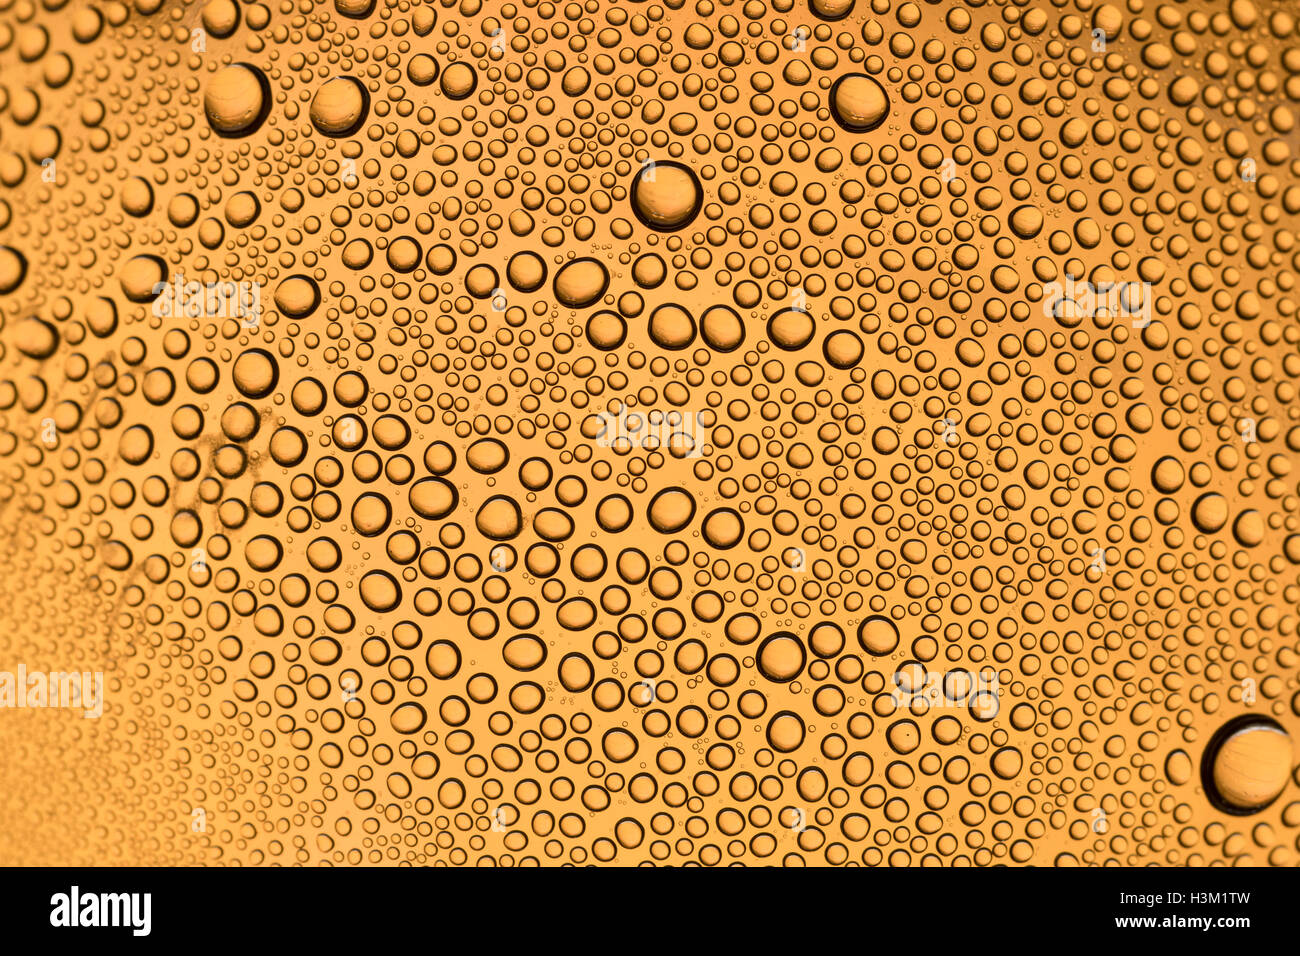 Abstract image of beads of water condensation on the inside of a PTFE bottle. World Water Day concept, Water Day abstract, water trading market Stock Photo